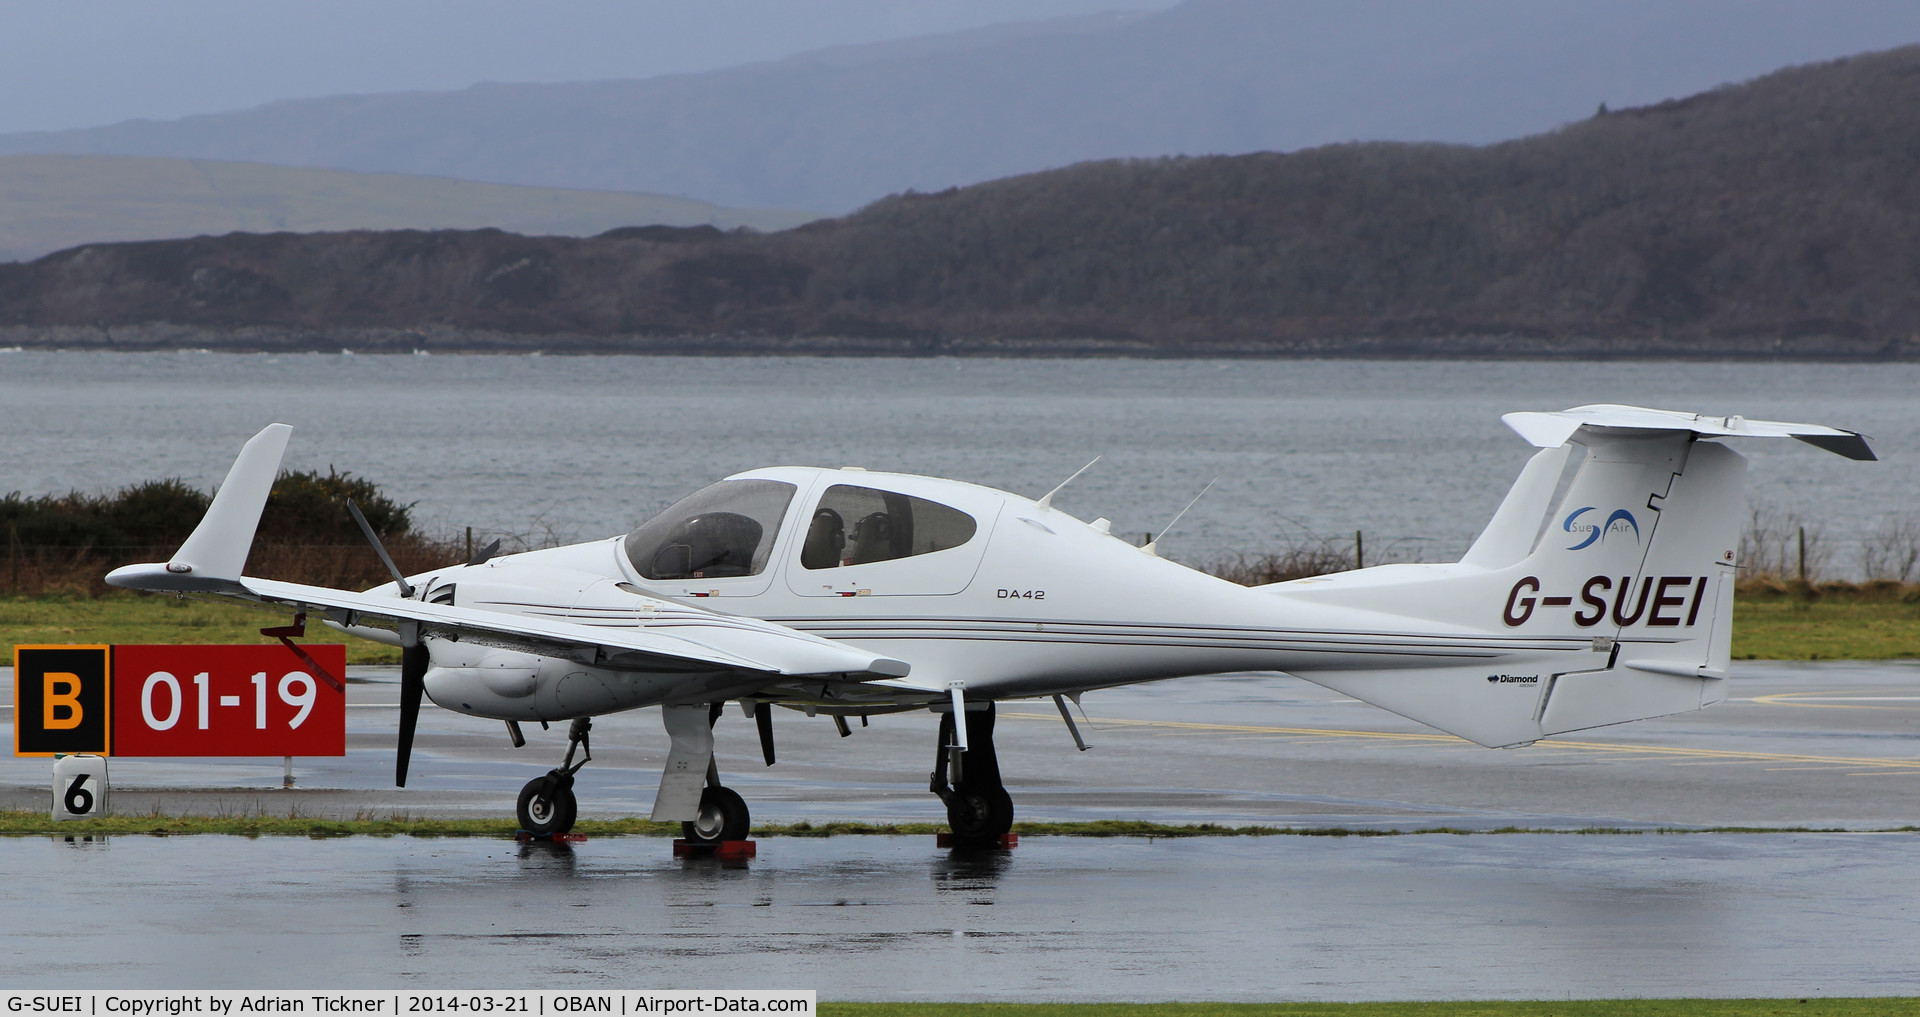 G-SUEI, 2009 Diamond DA-42 Twin Star C/N 42.415, Saw him landing as I approached the airfield.
Ground phots only.